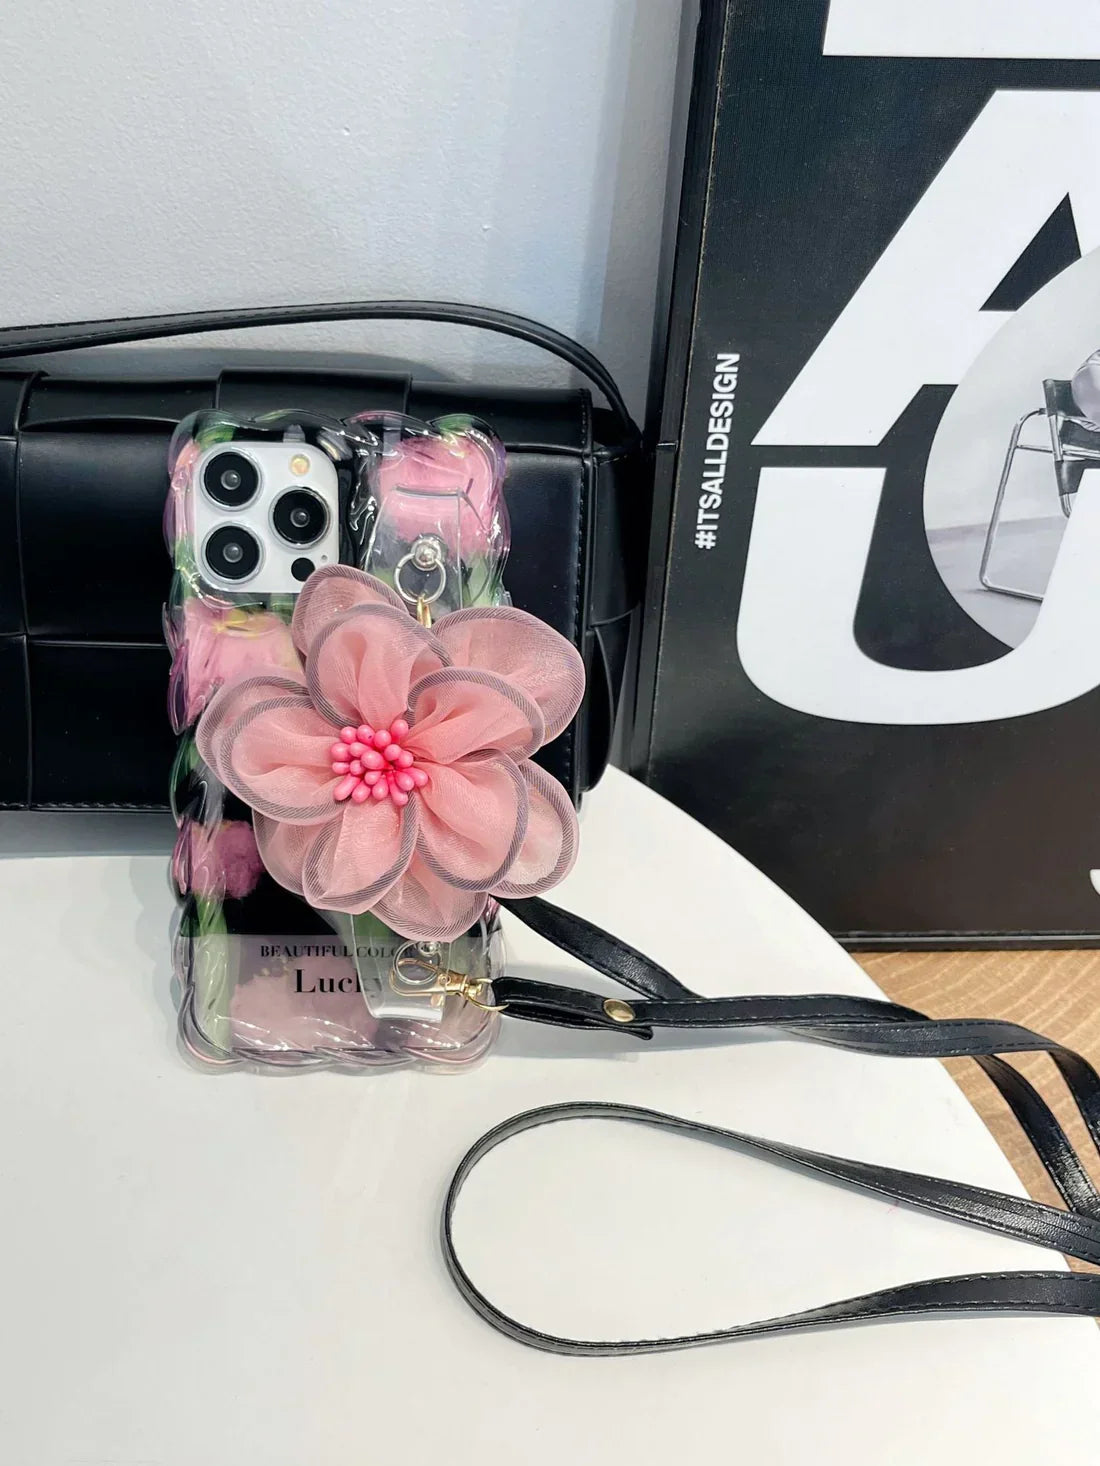 Icy Black Pink Flower Wristband iPhone Case with Messenger Strap